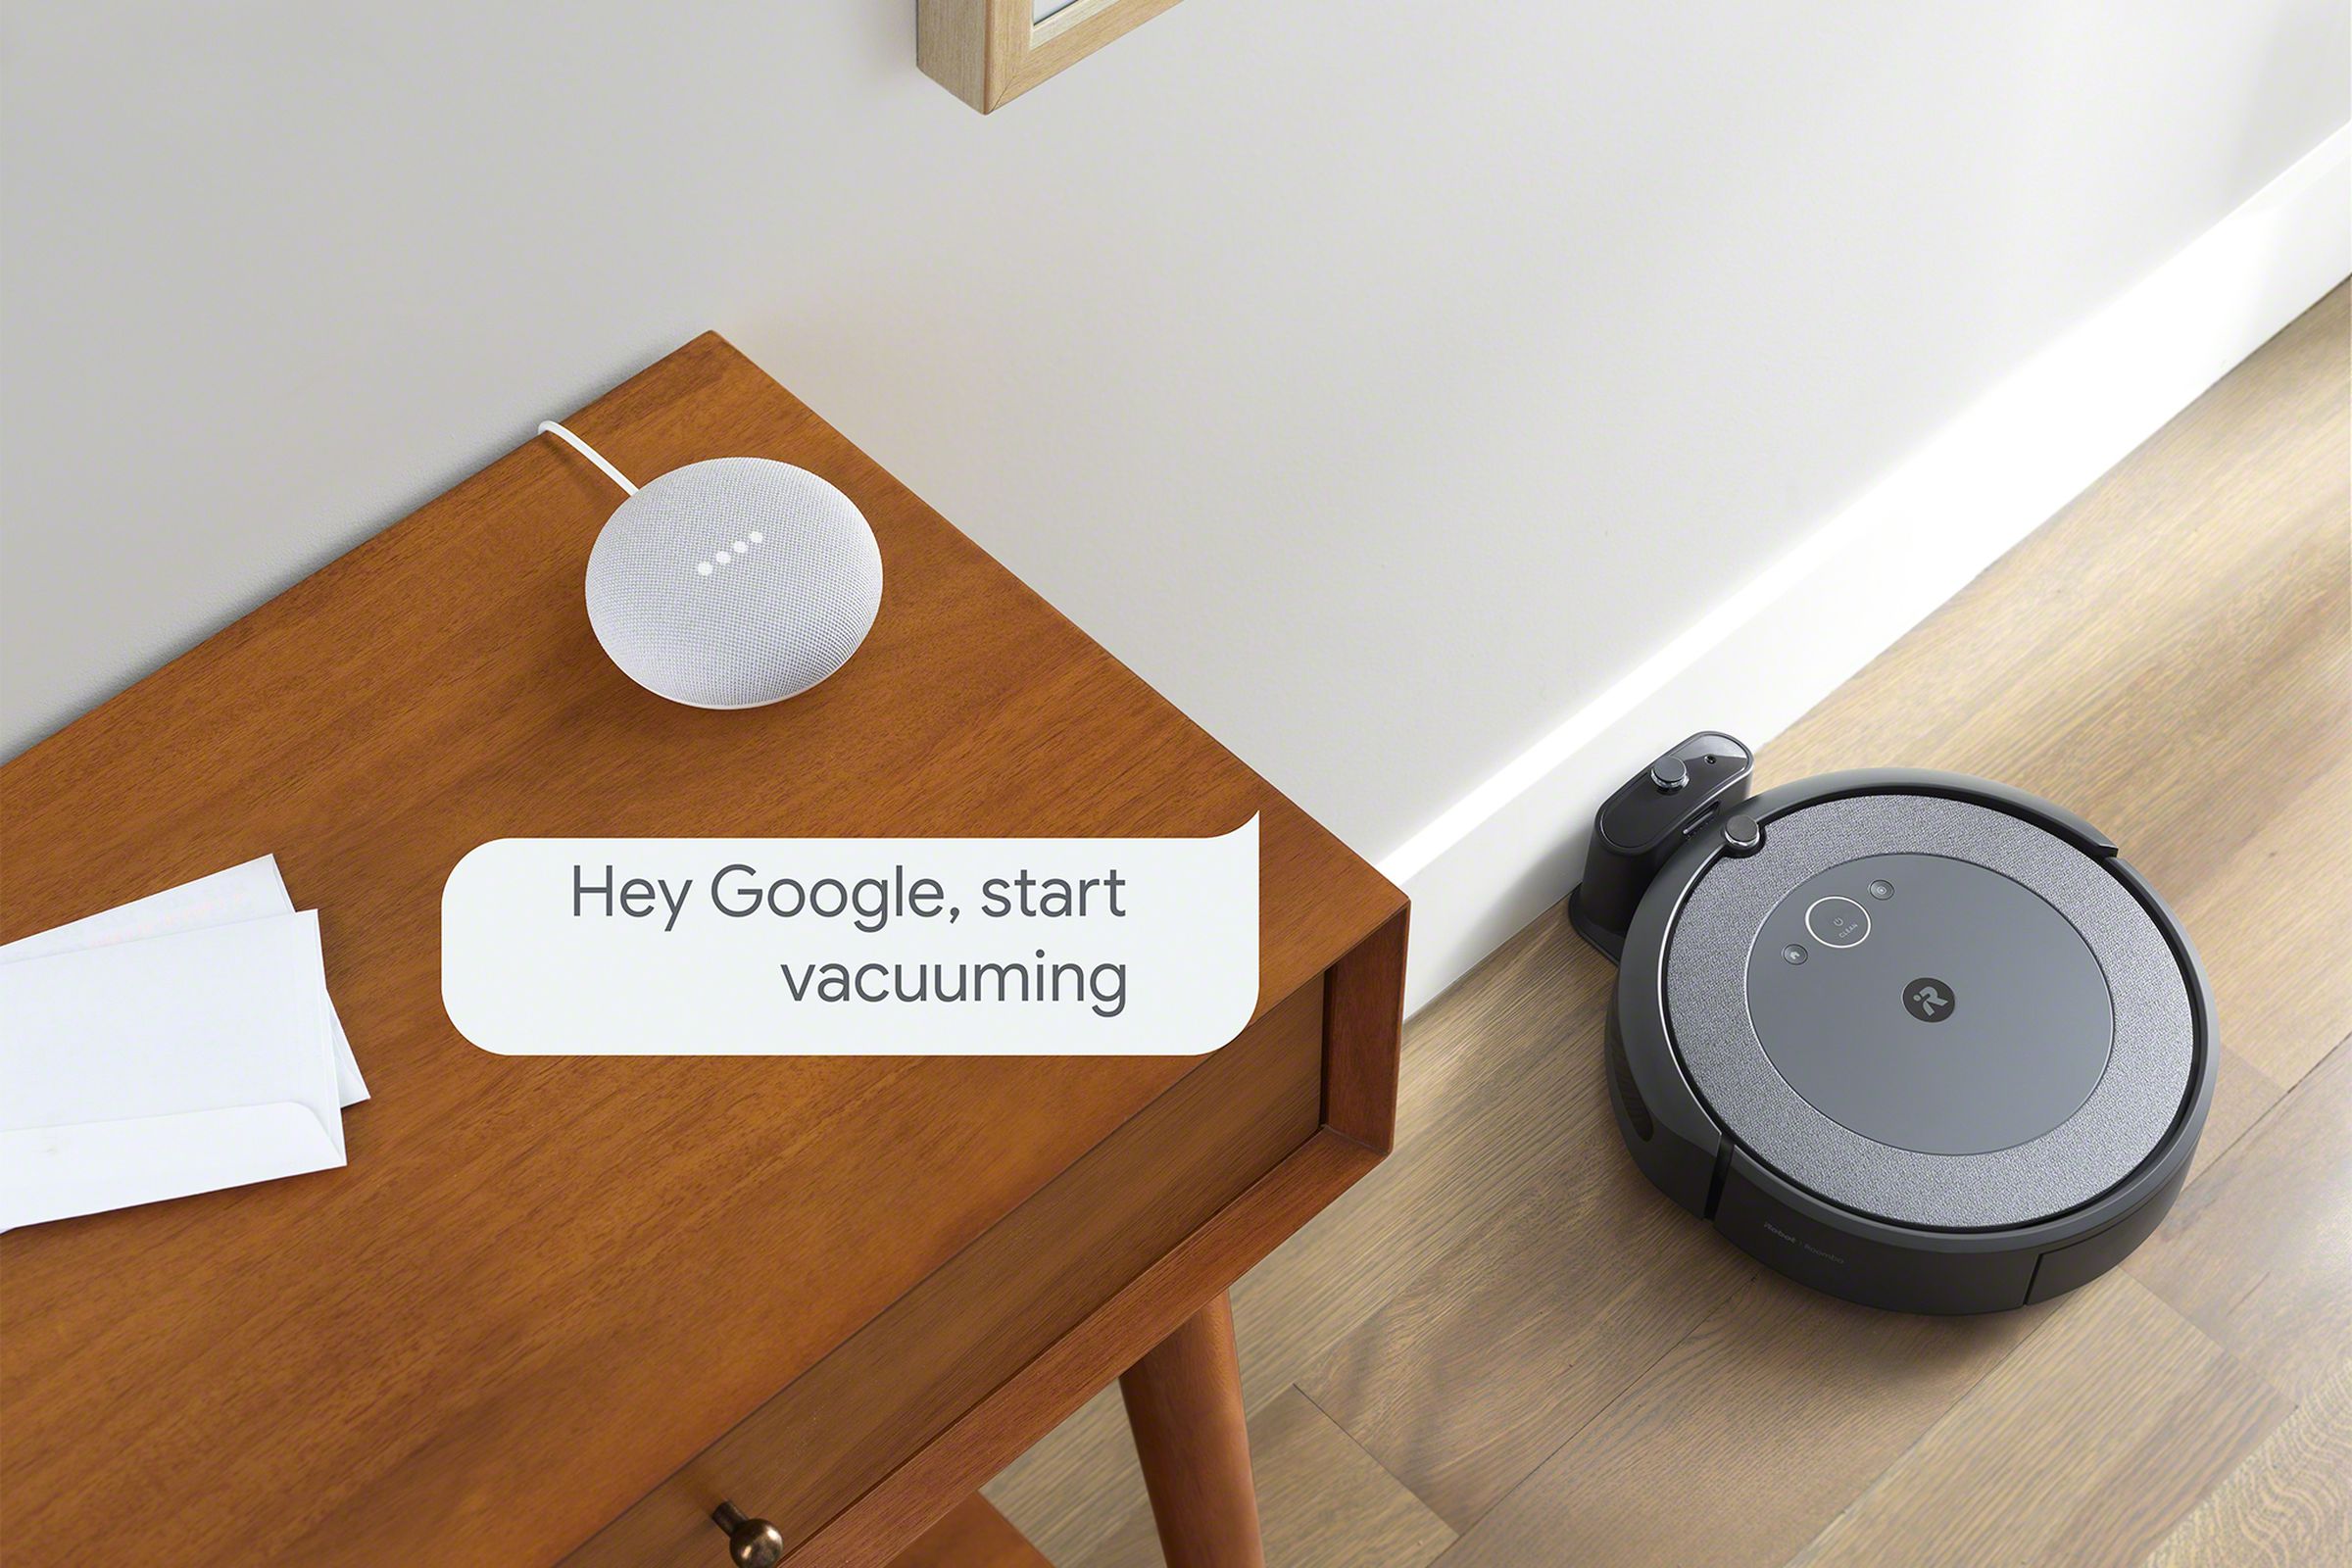 Robot vacuums like this Roomba i3 can respond to voice commands from Google Assistant.